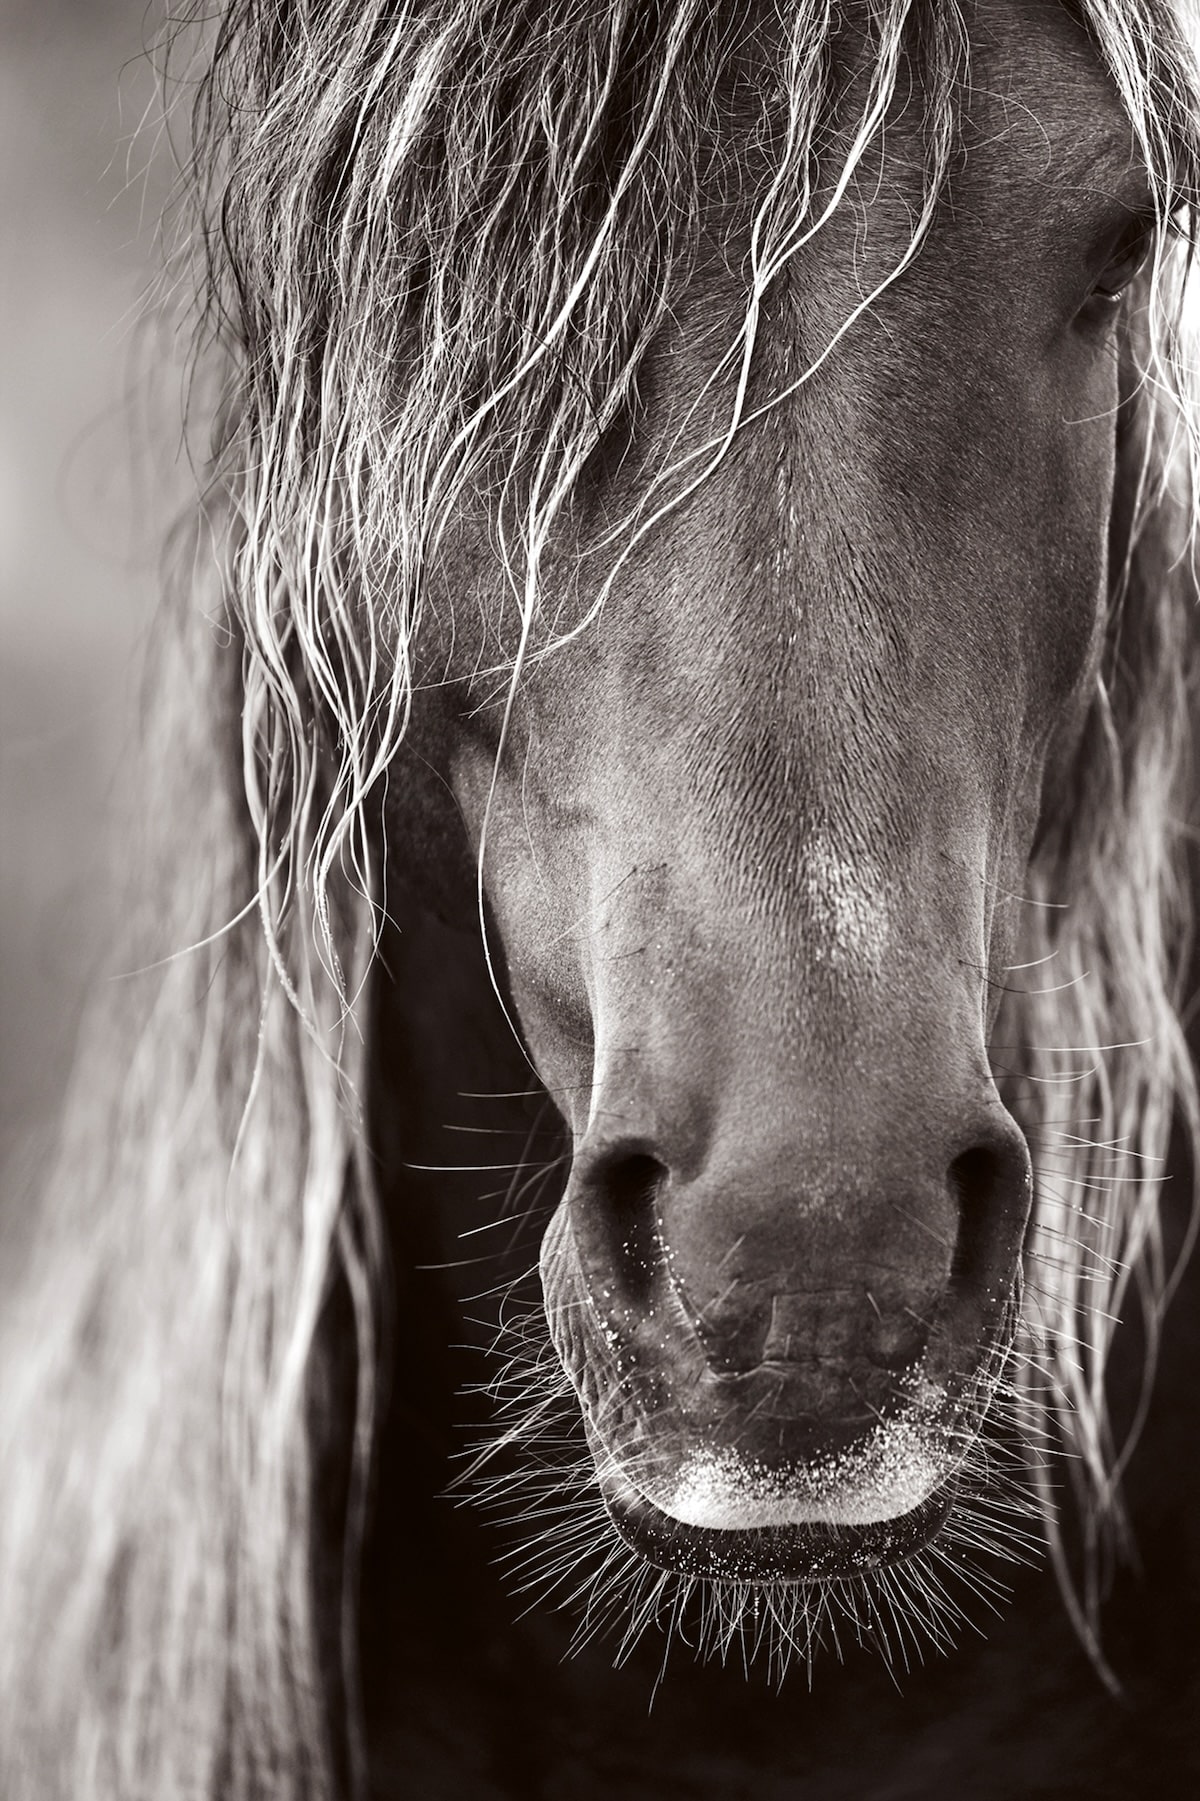 Close-up of a horse's face